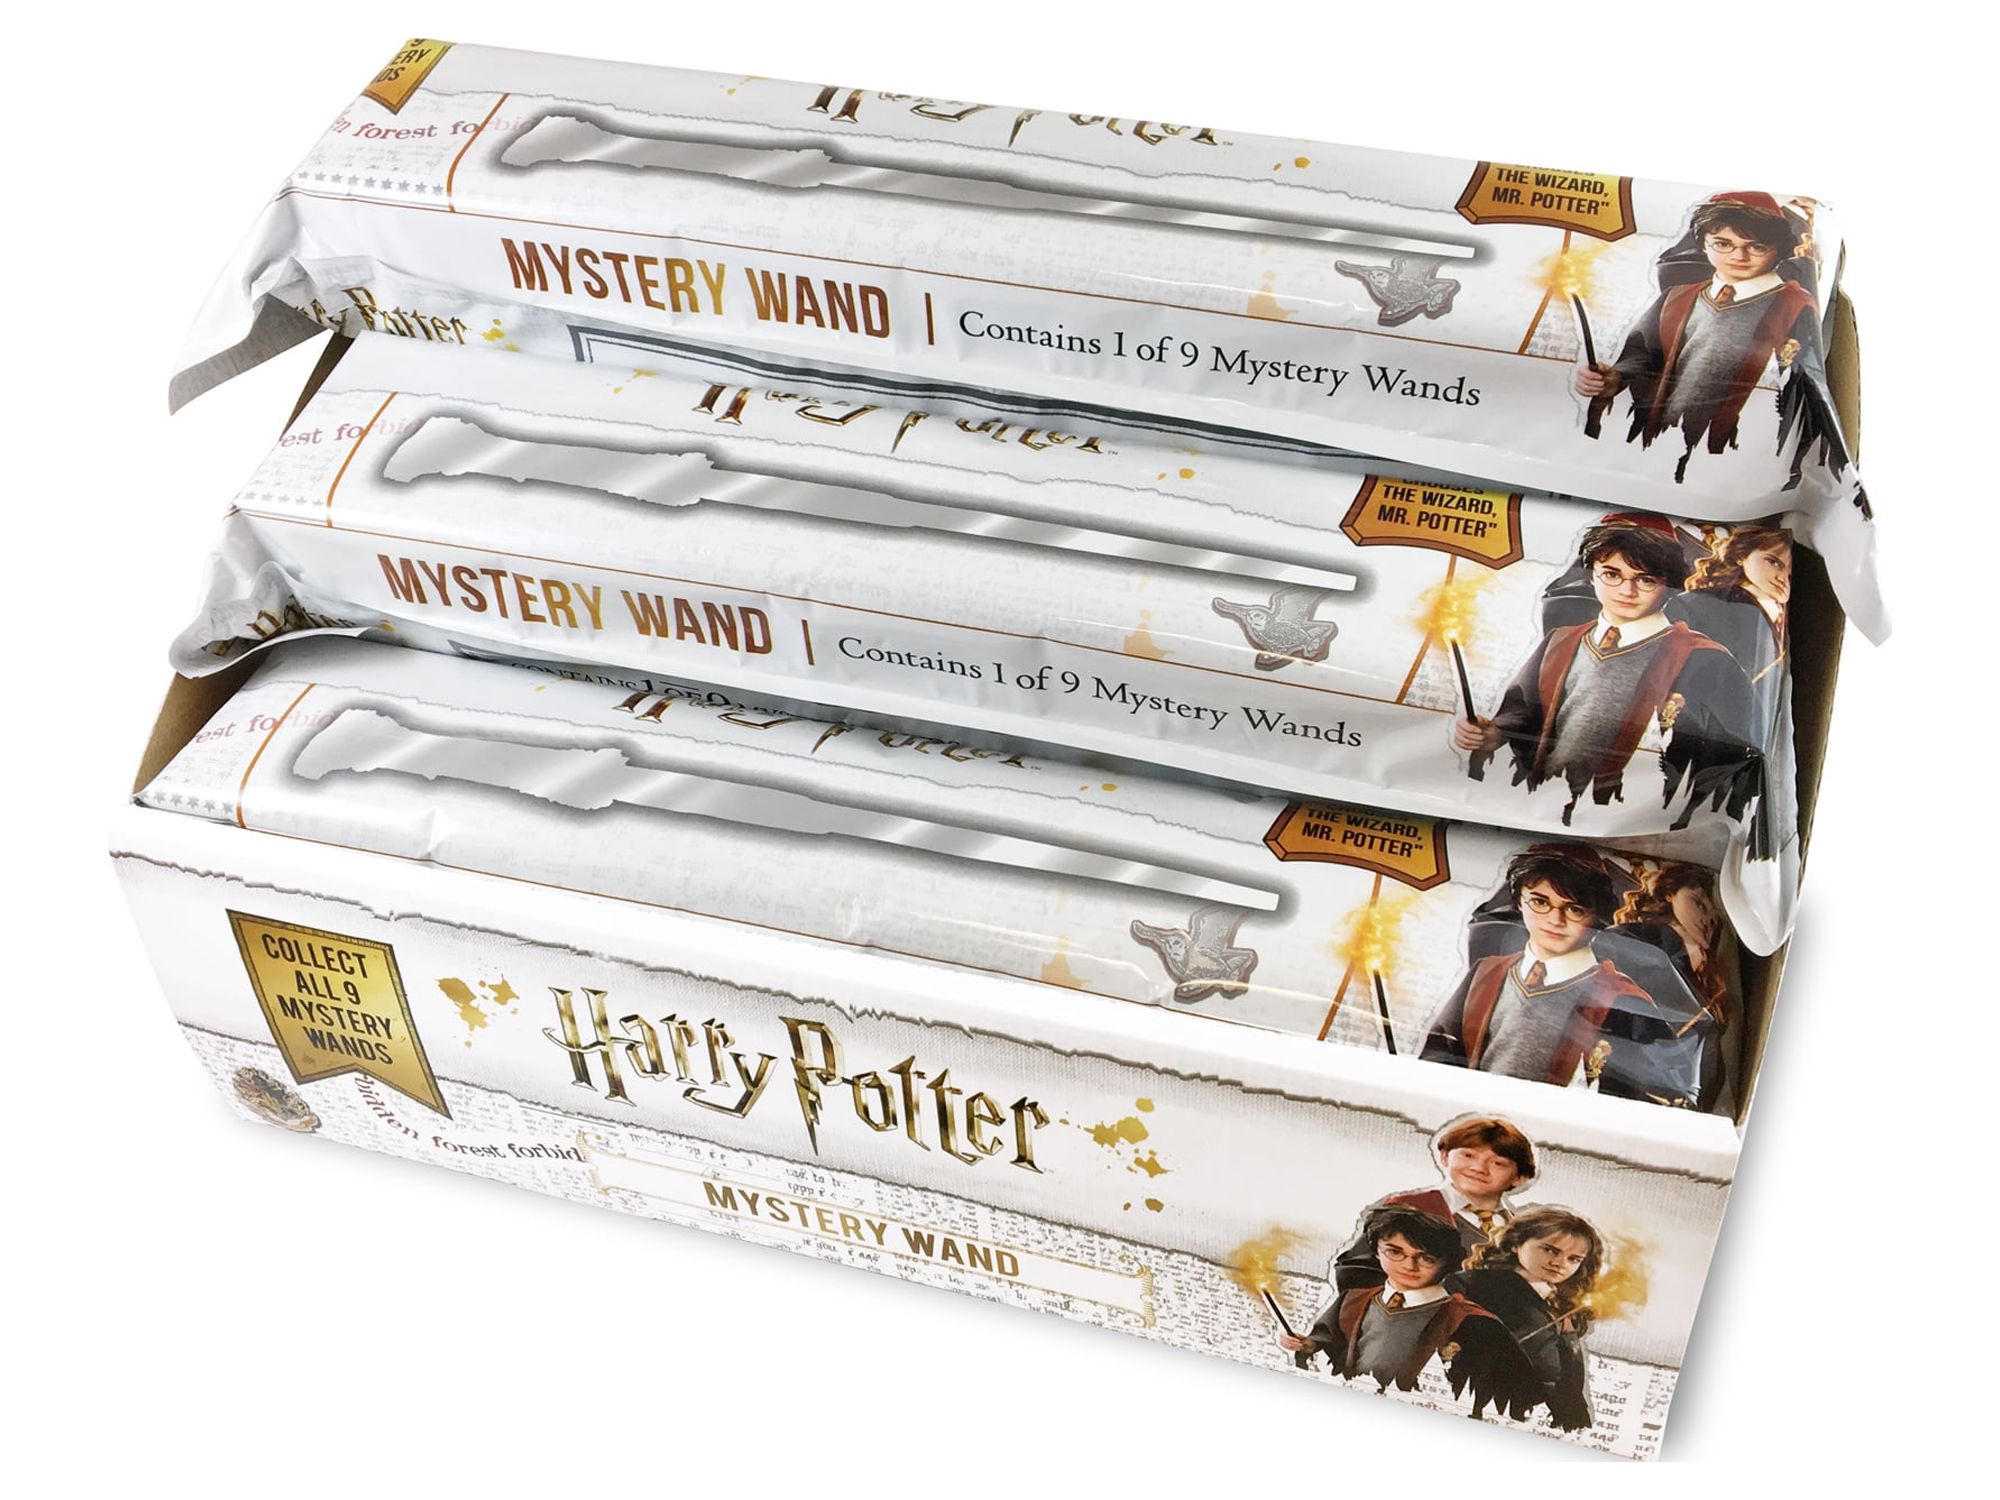 Harry Potter Mystery Wand All Occasion Costume Accessory - image 4 of 4